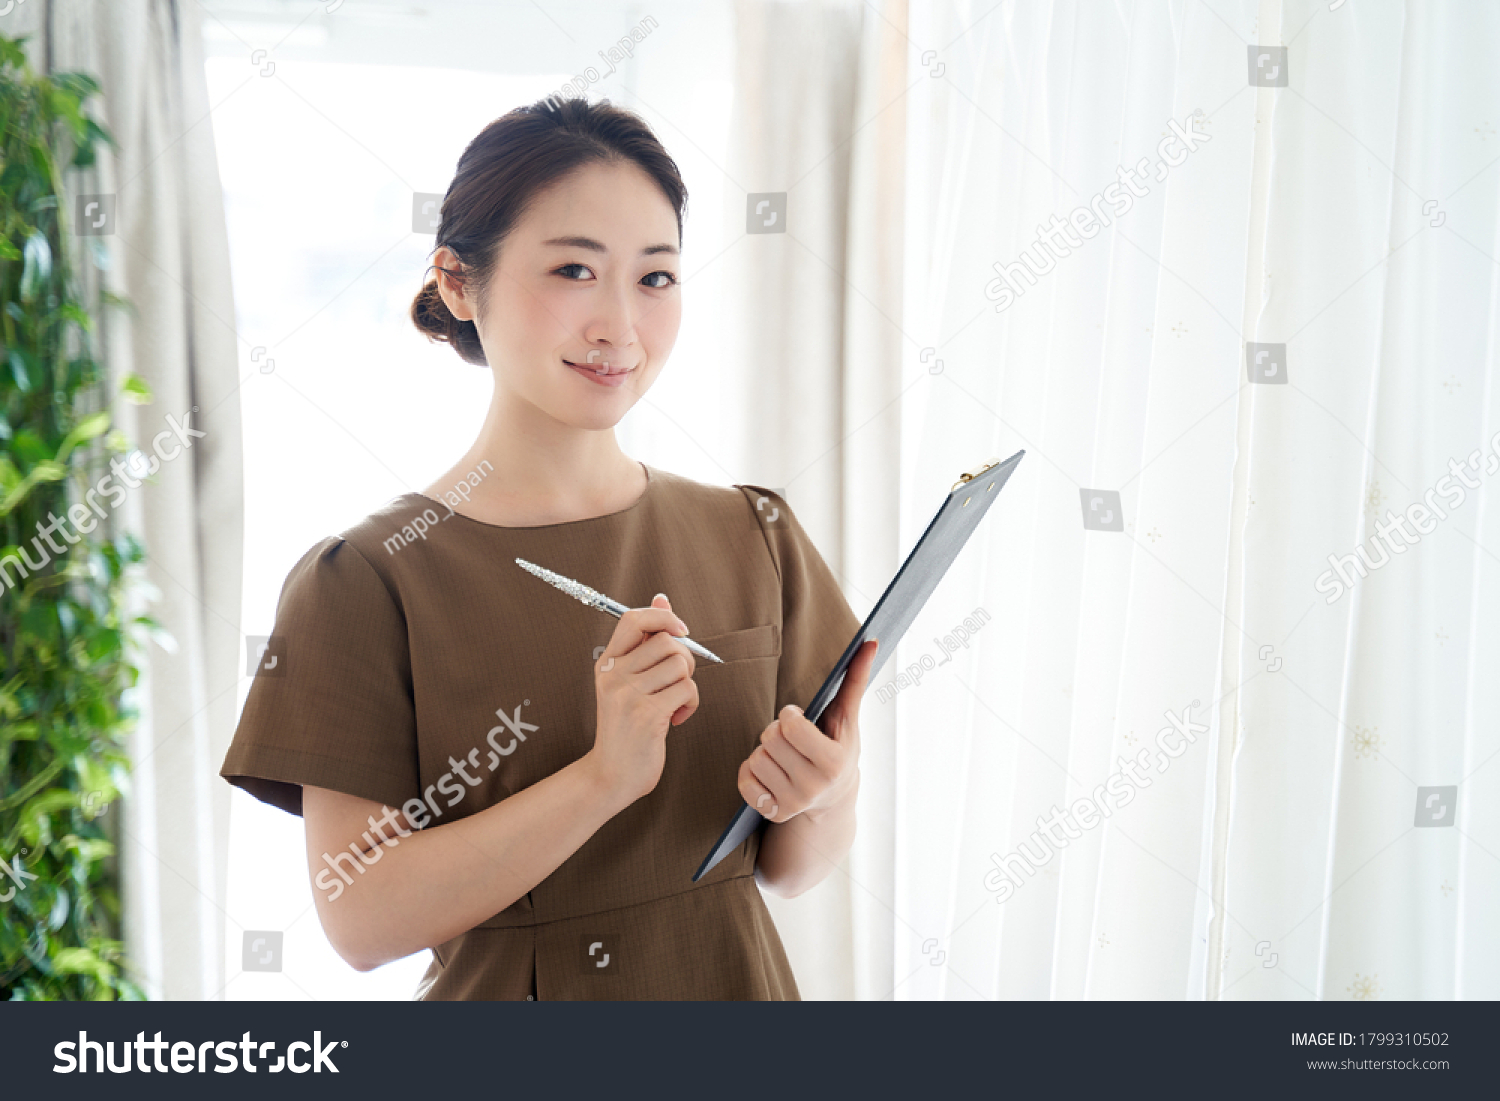 Japanese woman working at an aesthetic salon #1799310502